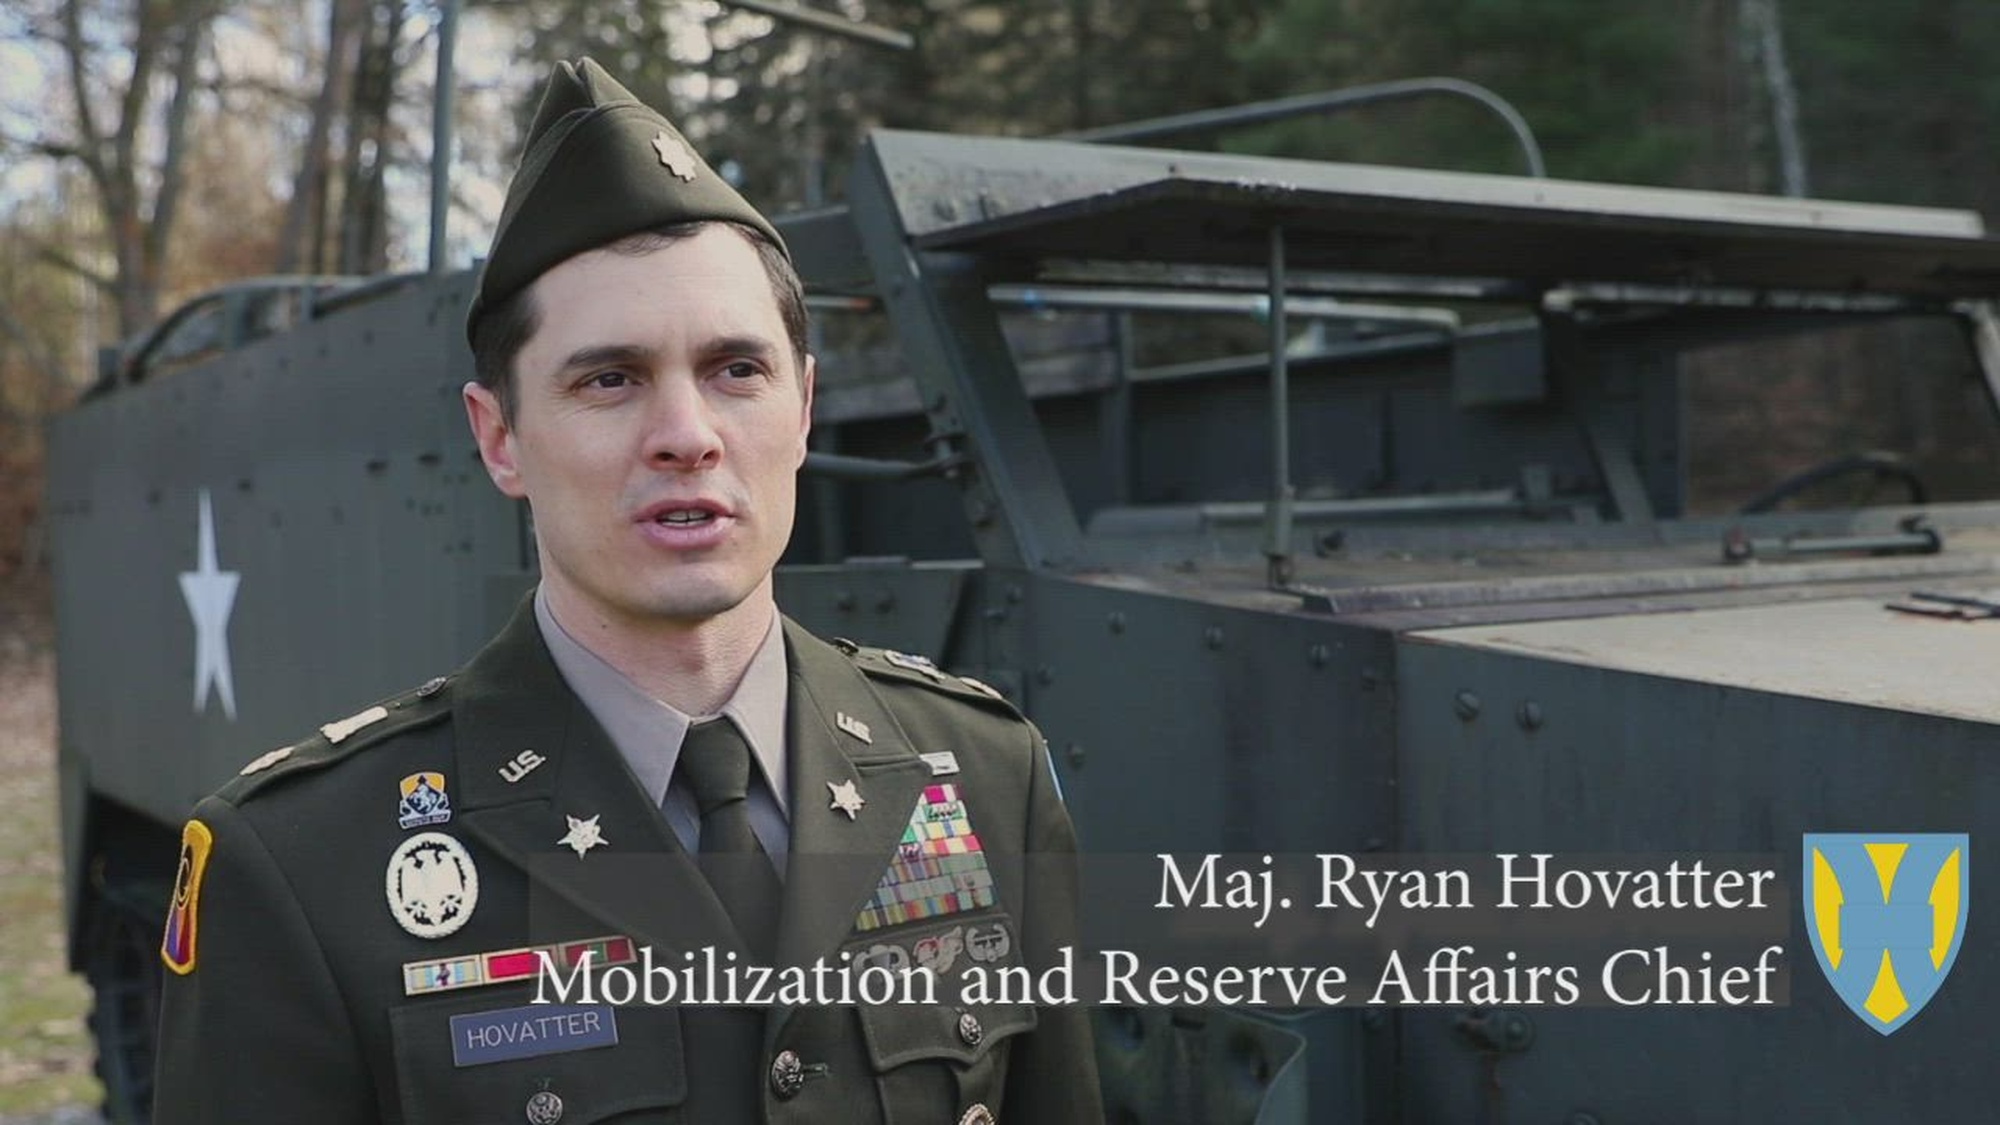 U.S. Army Maj. Ryan Hovatter, mobilization and reserve affairs chief, 21st Theater Sustainment Command, gives an interview detailing the importance of the Red Ball Express within World War Two on Panzer Kaserne, Kaiserslautern, Germany, on March 2, 2023. (U.S. Army video by Sgt. Andrew Jo)